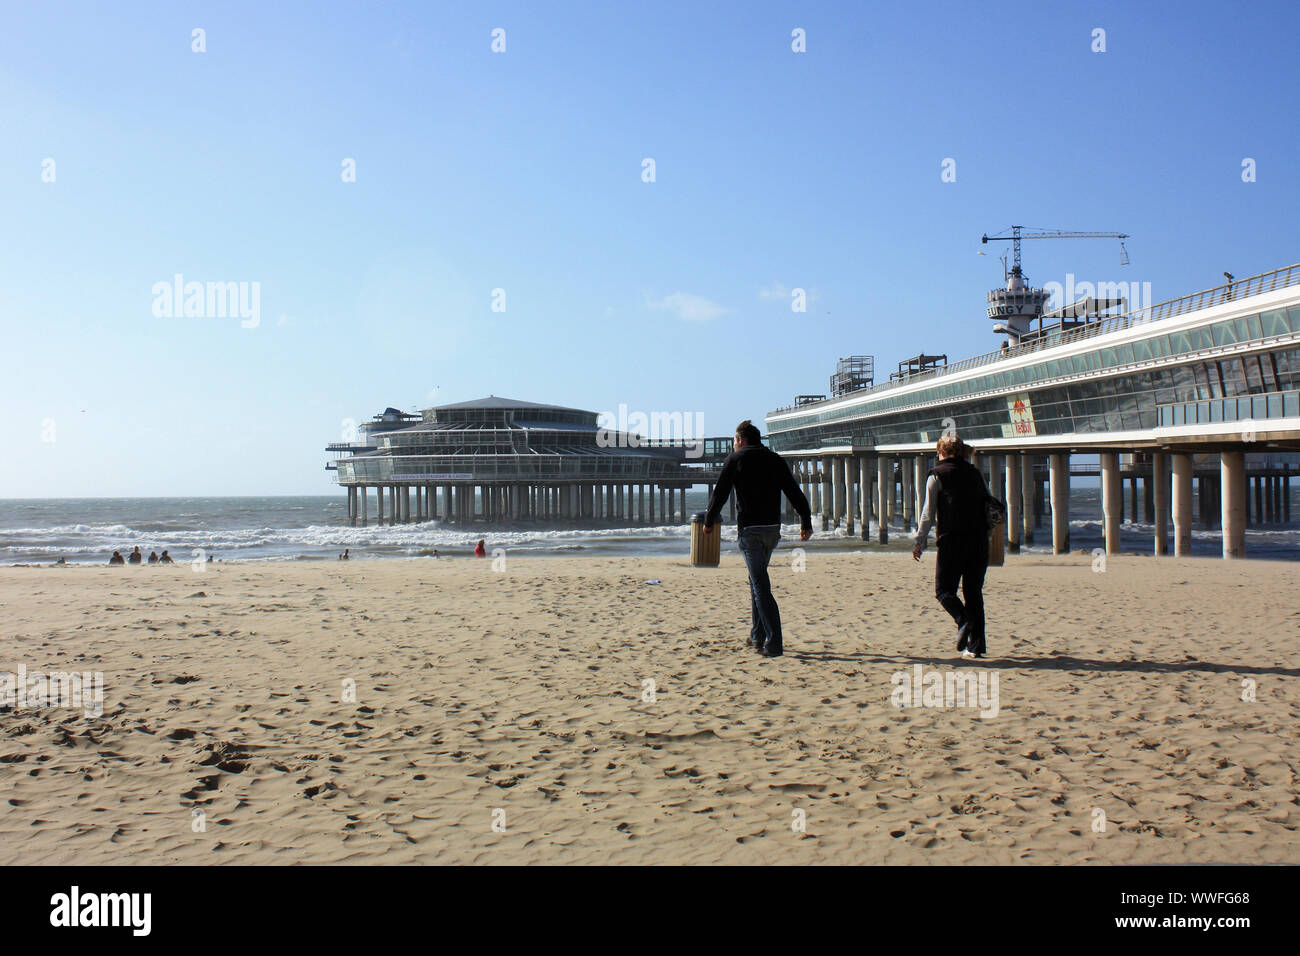 Scheveningen beach, the most popular stretch of sand in Holland. It is a great place for walking, sunning and swimming, as well as surfing. Stock Photo